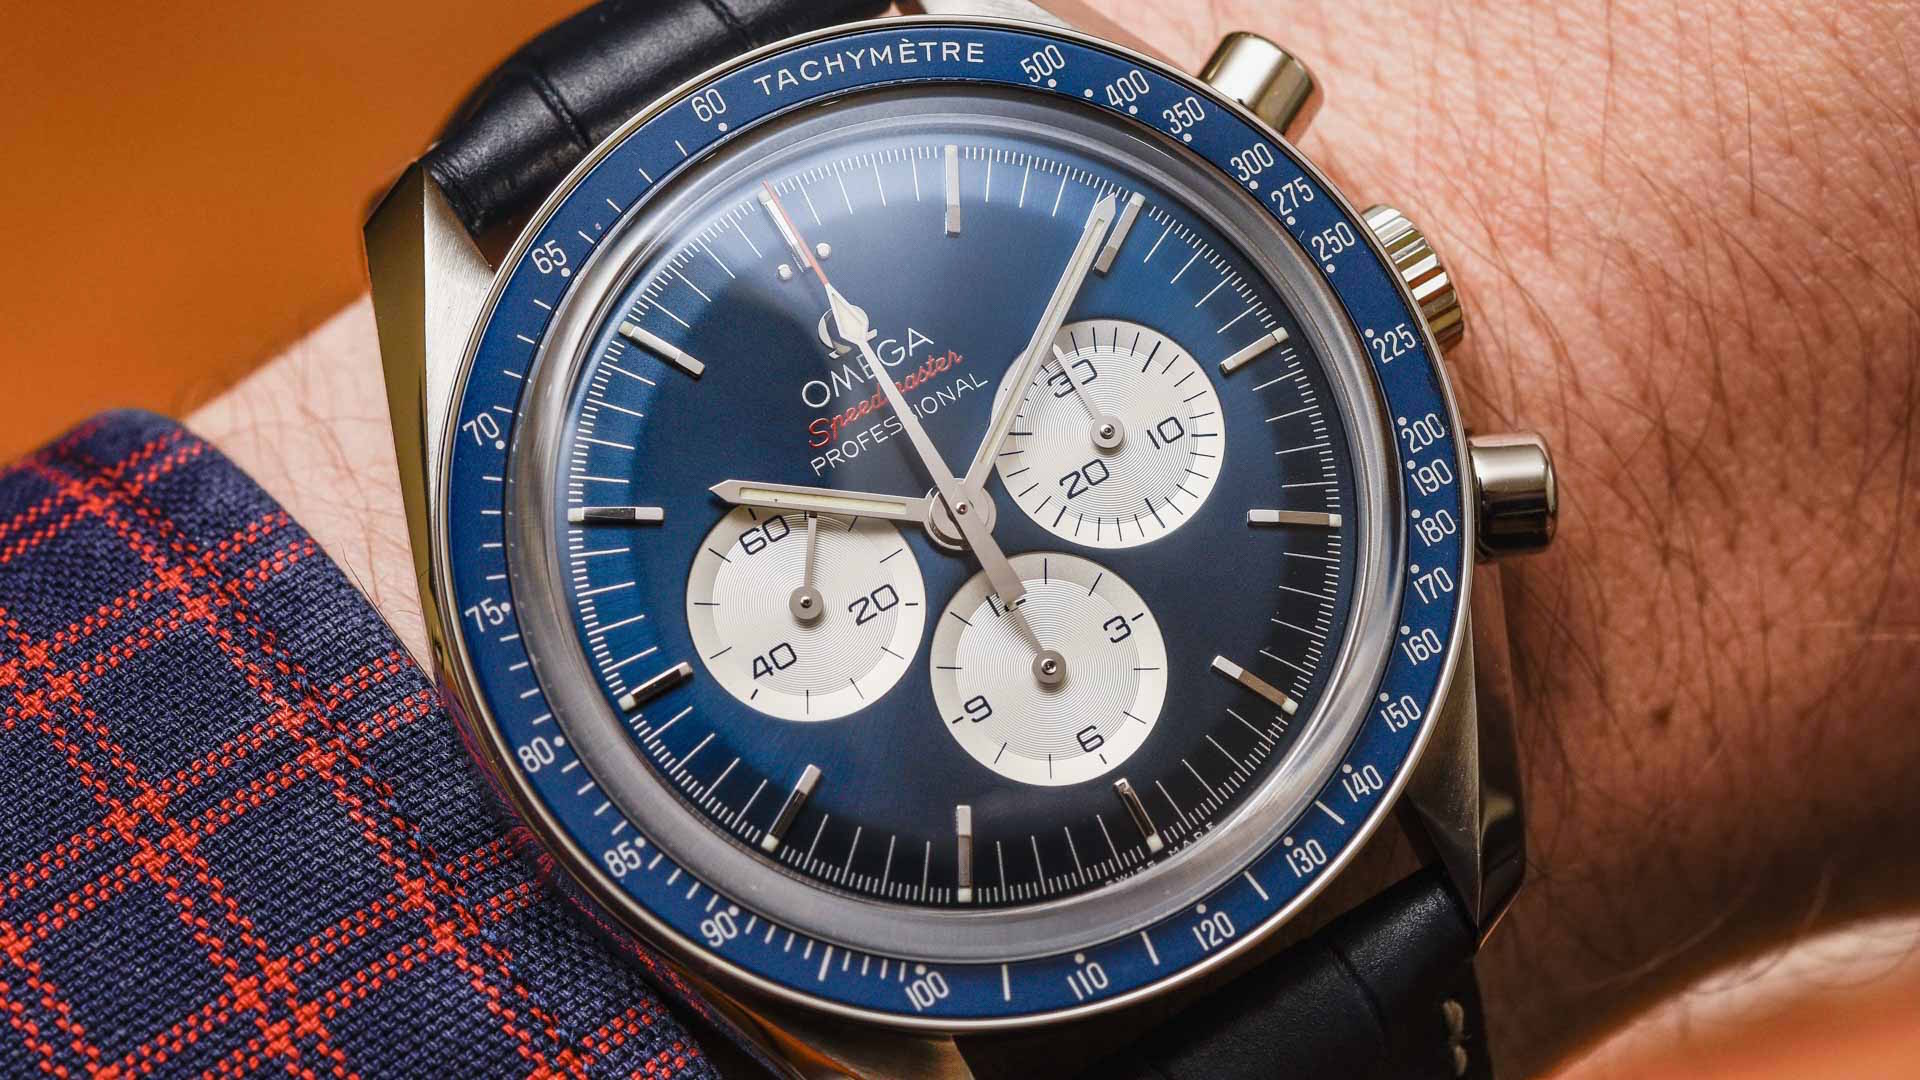 Omega Speedmaster Moonwatch Professional ‘Tokyo 2020’ Limited Edition Watches Hands-On